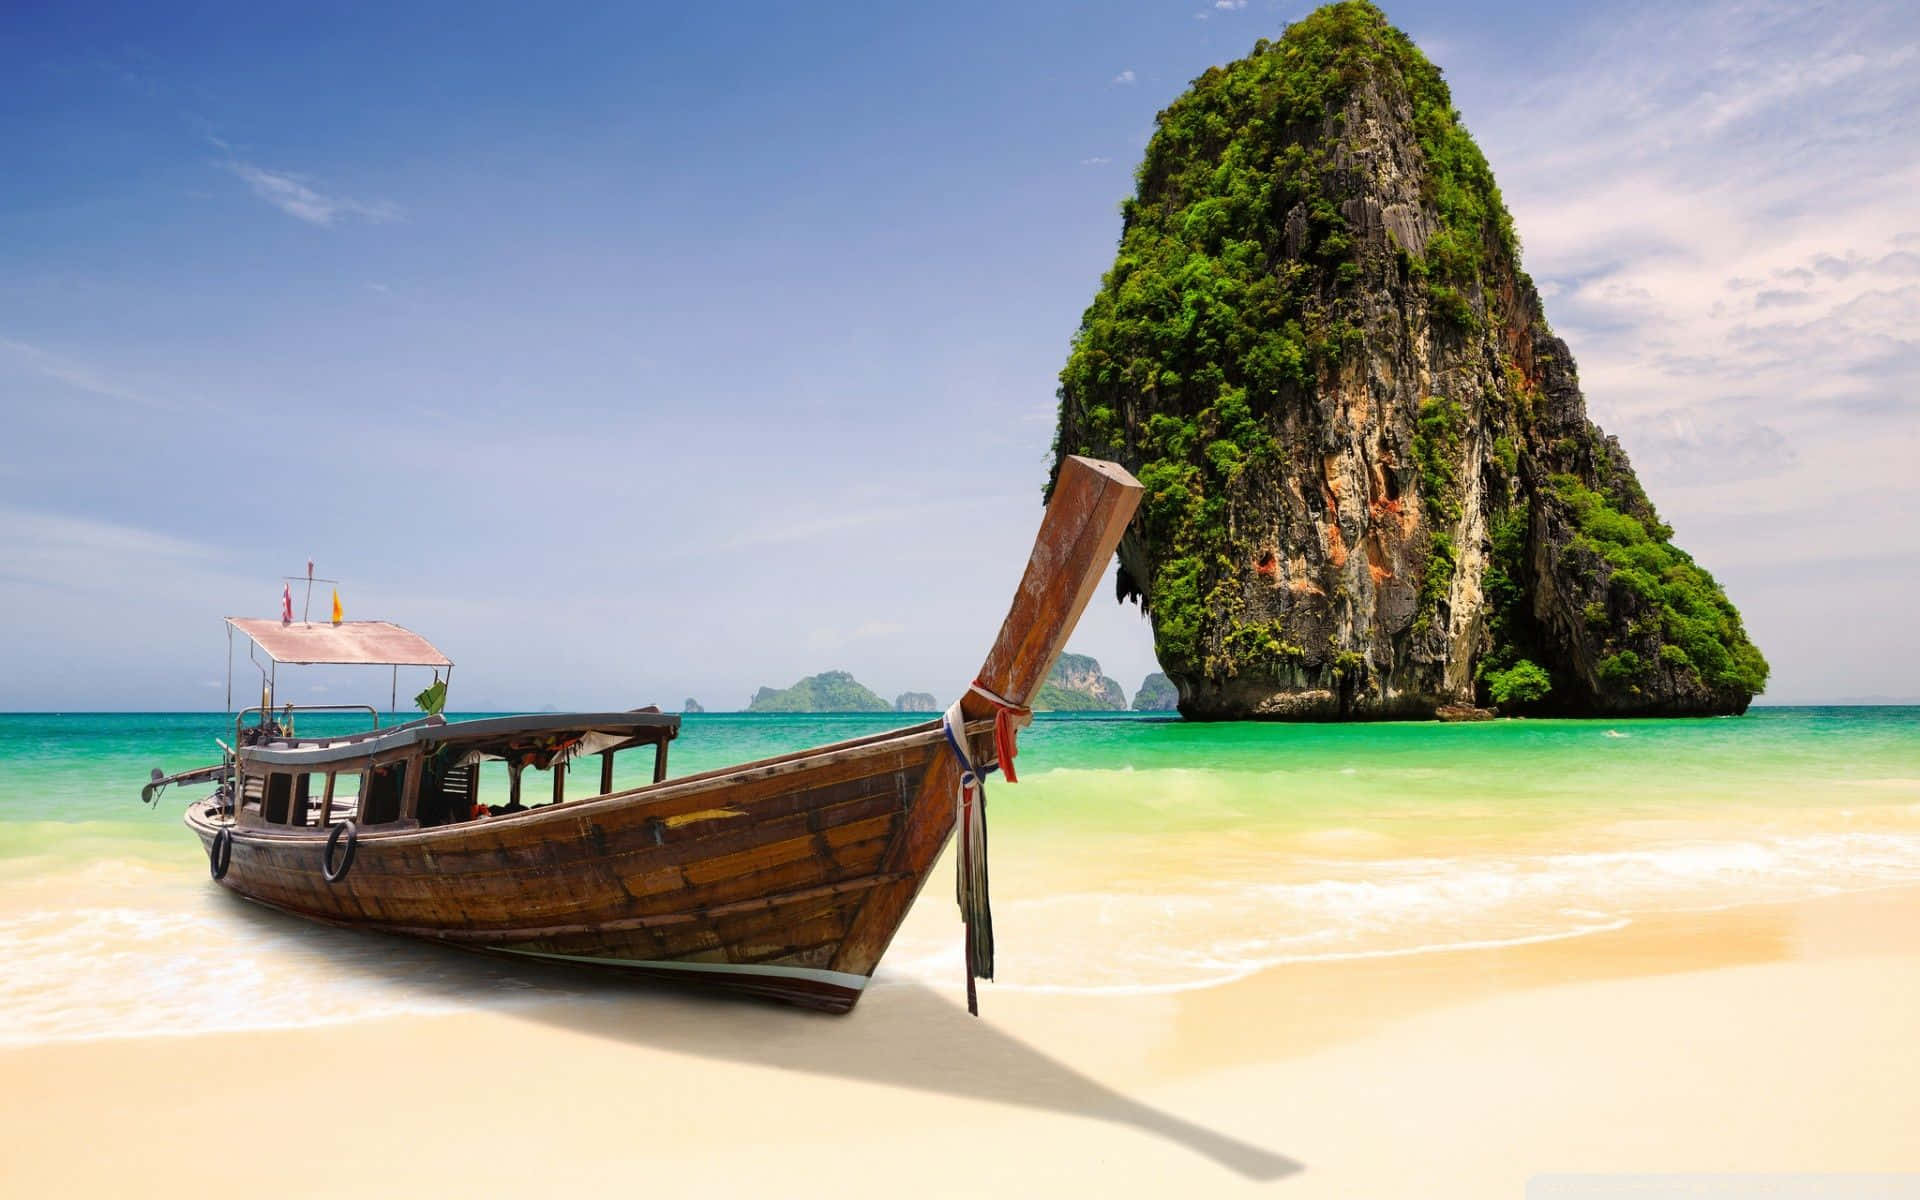 Be amazed by the stunning beauty of Thailand